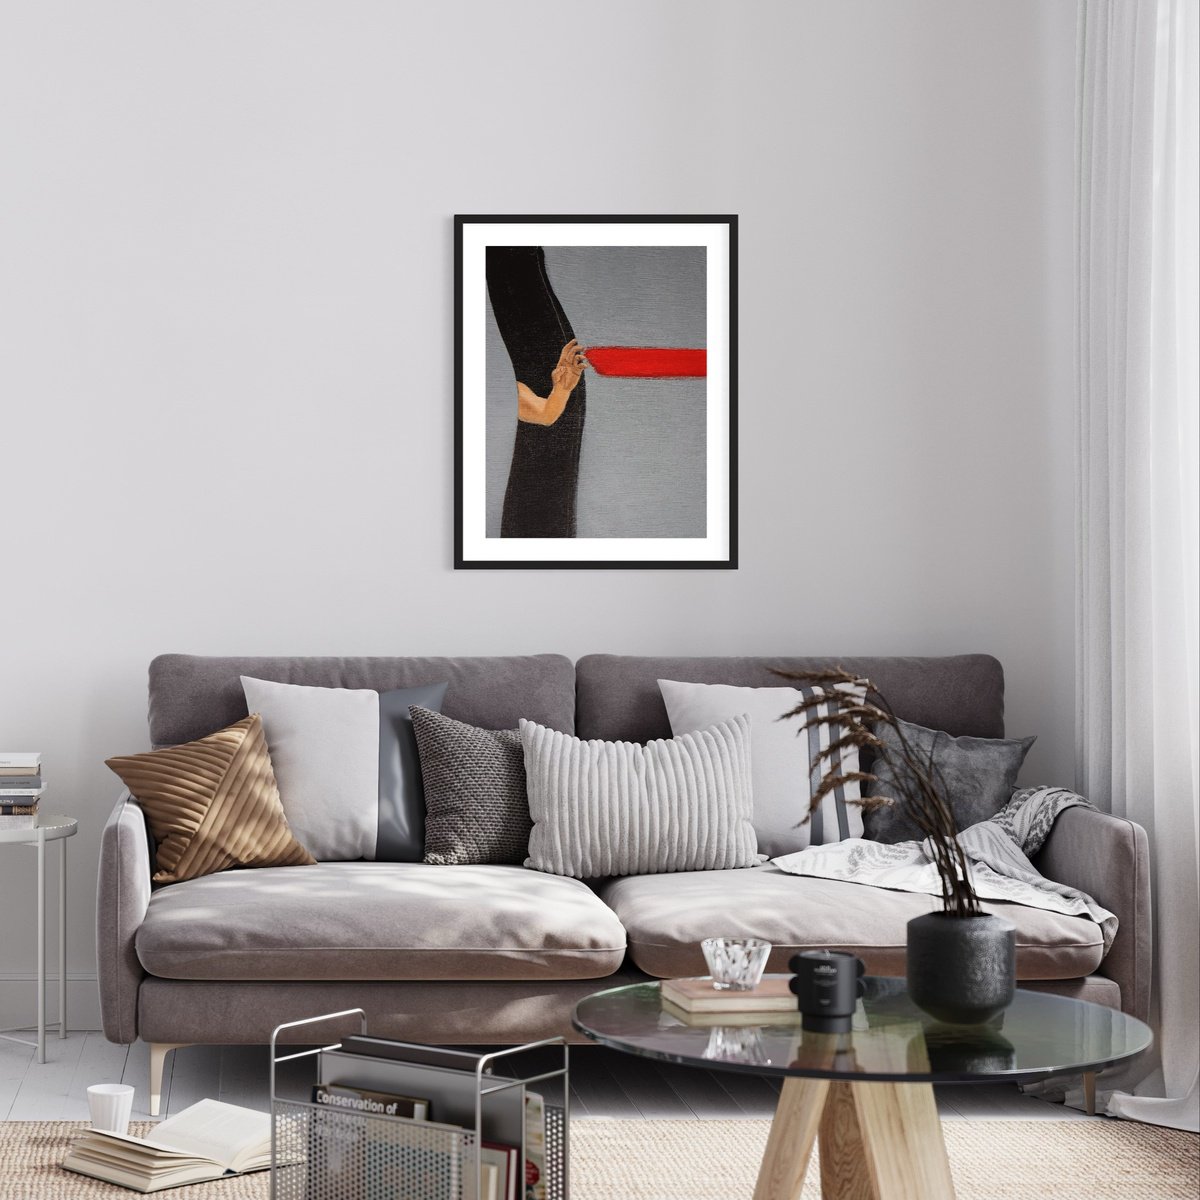 Red line-BLACK LINE, OIL PAINTING,HOME DECOR, OFFICE DECOR, ORIGINAL GIFT by Anzhelika Klimina